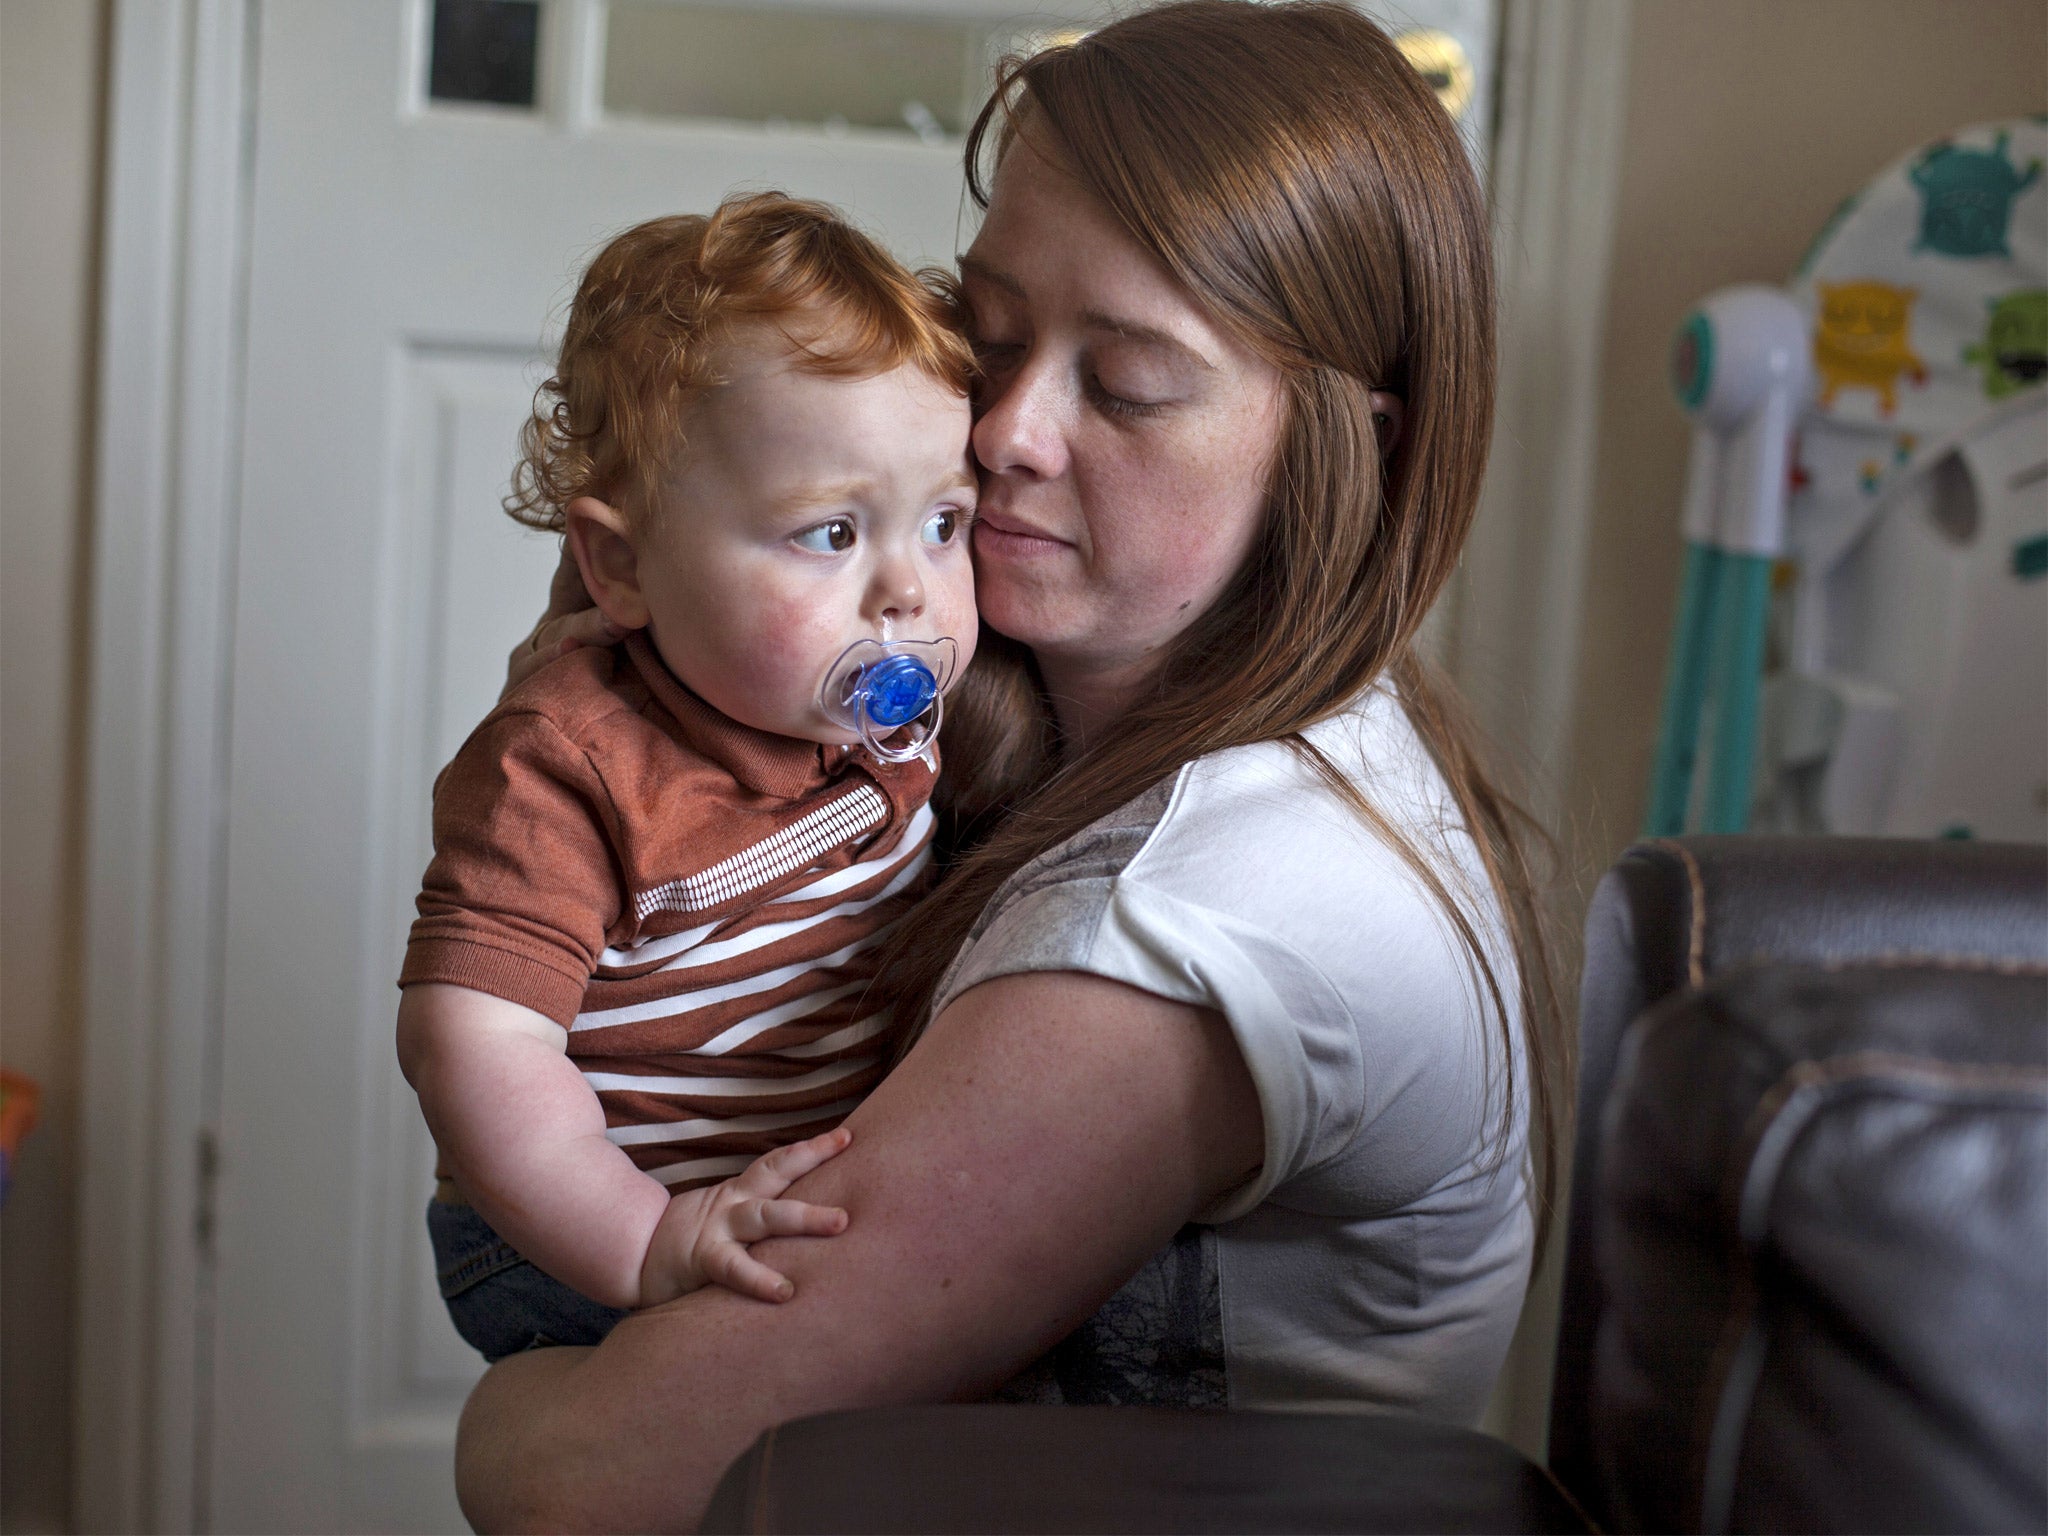 Vicky Cunningham and her son, Oliver-James, are on the cusp of poverty in West Yorkshire